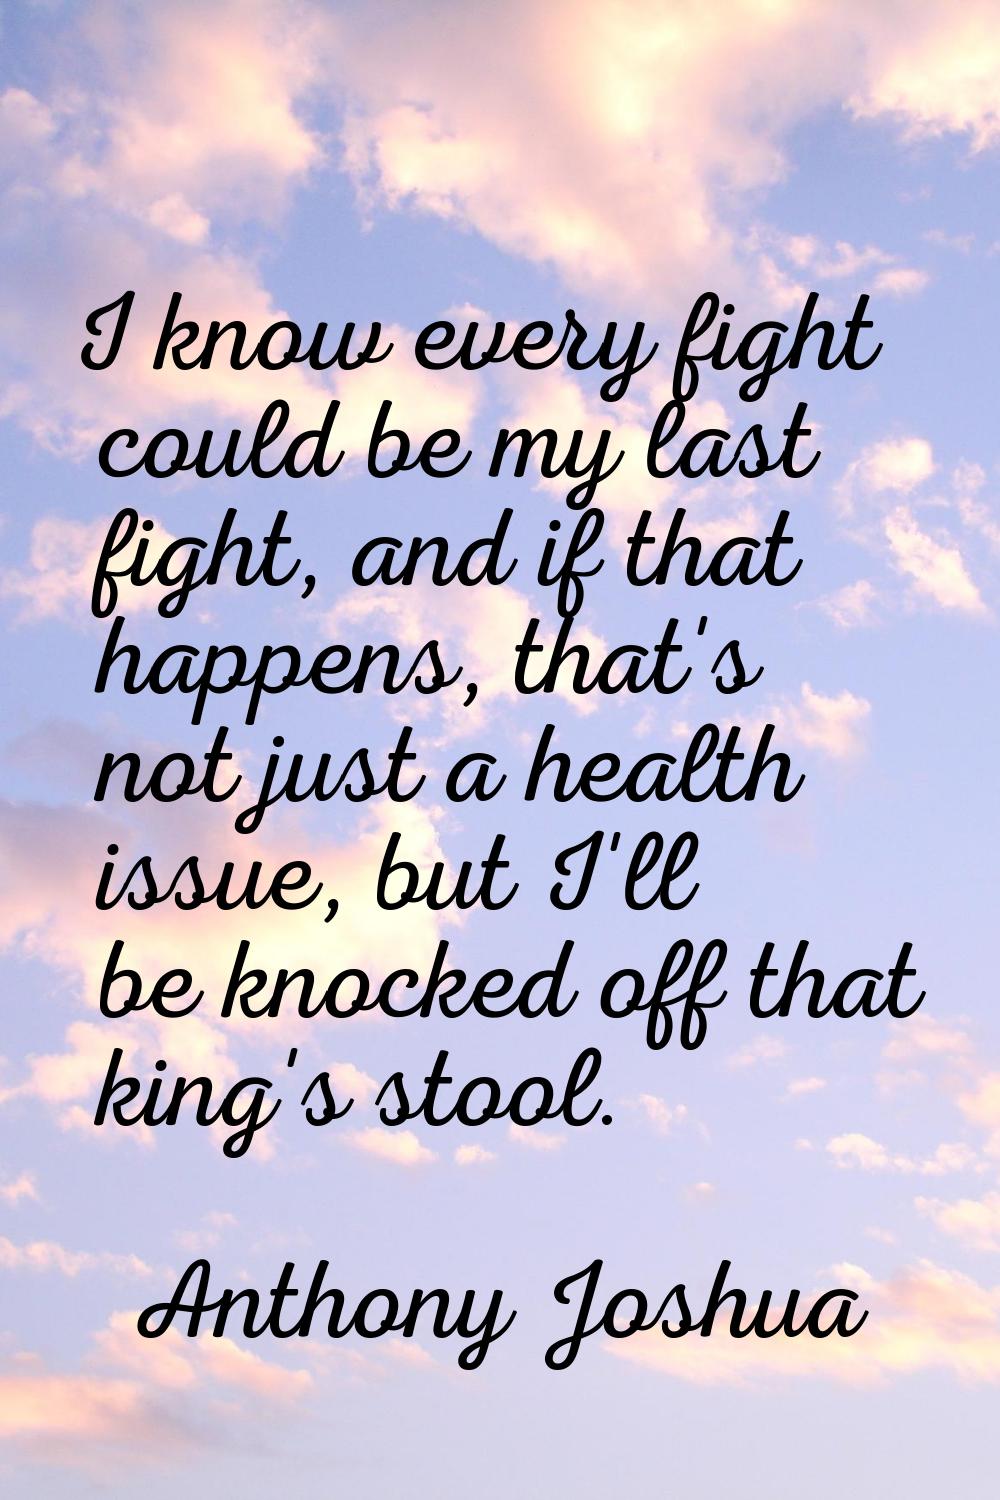 I know every fight could be my last fight, and if that happens, that's not just a health issue, but